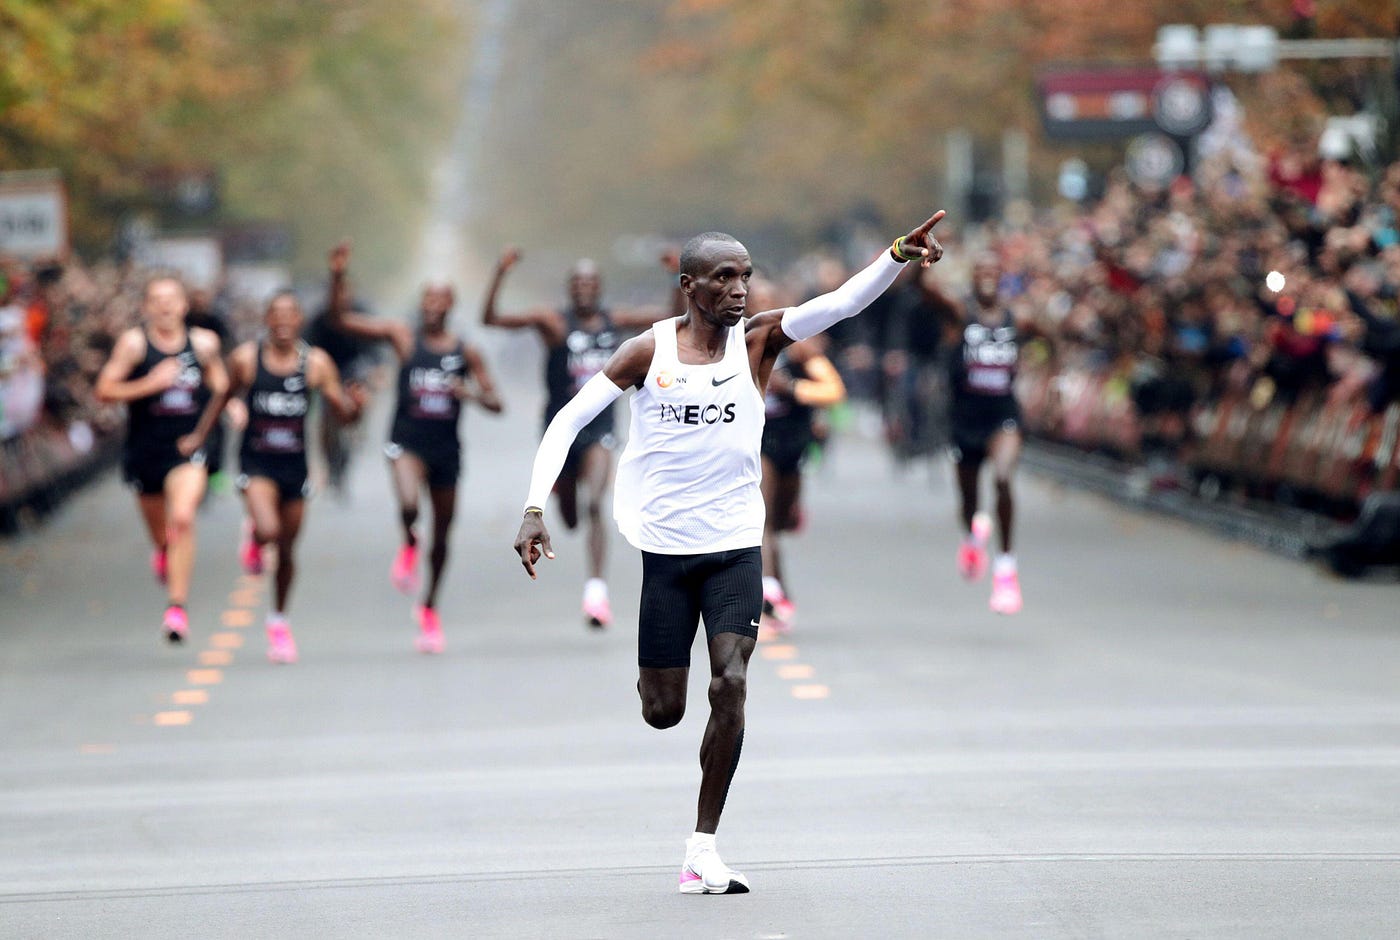 Becoming Elite: What it Takes to be a World-Class Marathon Runner